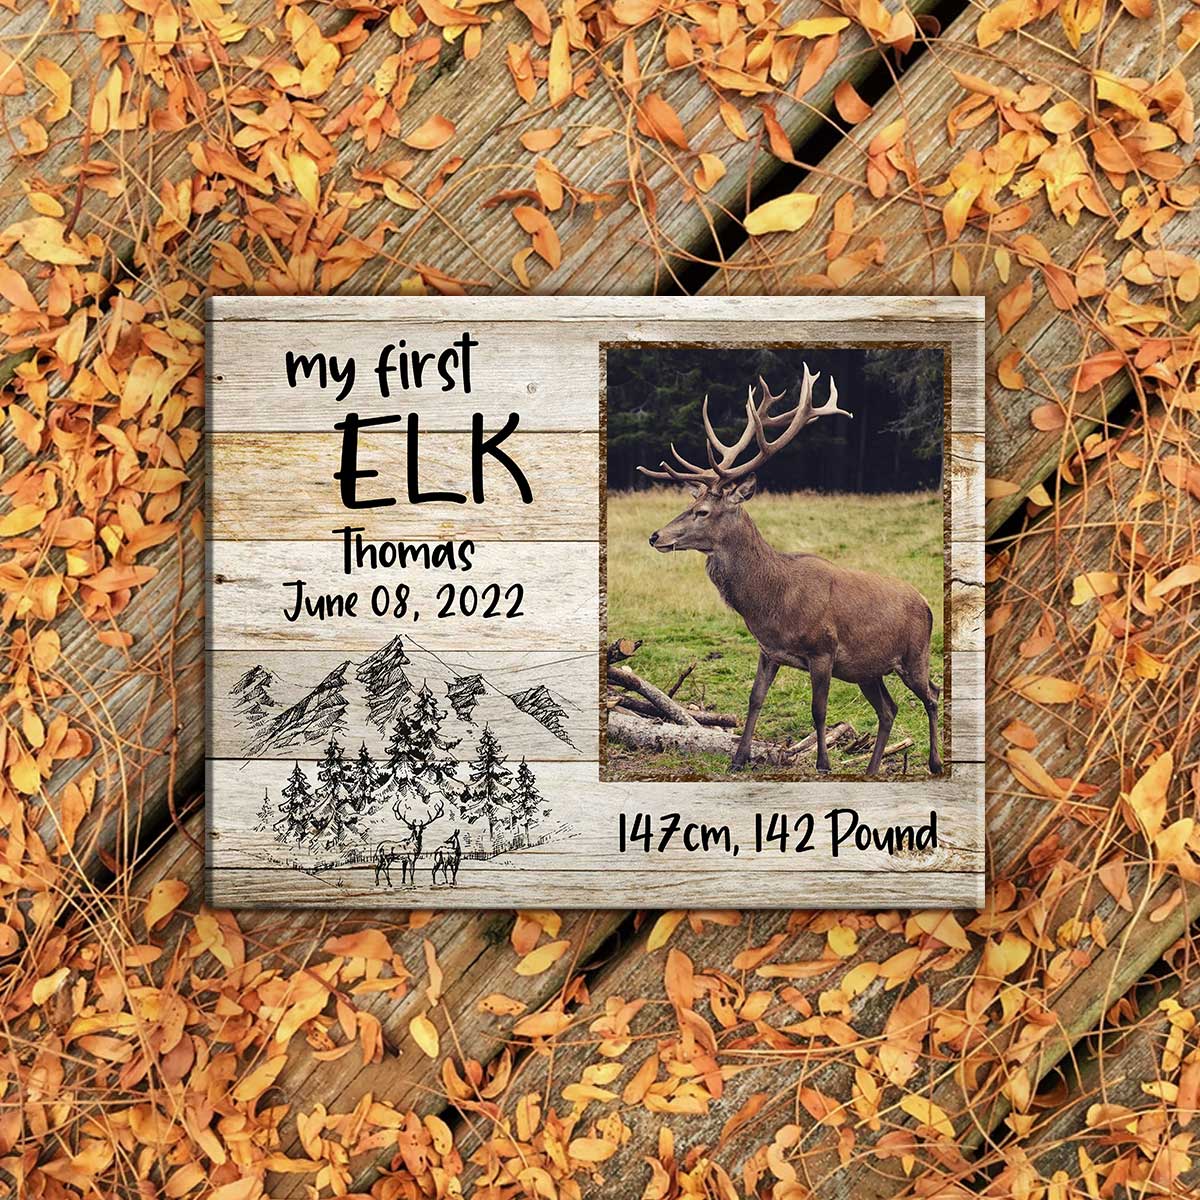 https://benicee.com/wp-content/uploads/2022/09/Personalized-My-First-Elk-Photo-print-Hunting-Man-Gifts-Cabin-Decor-Hunting-Gift-Ideas-4.jpg